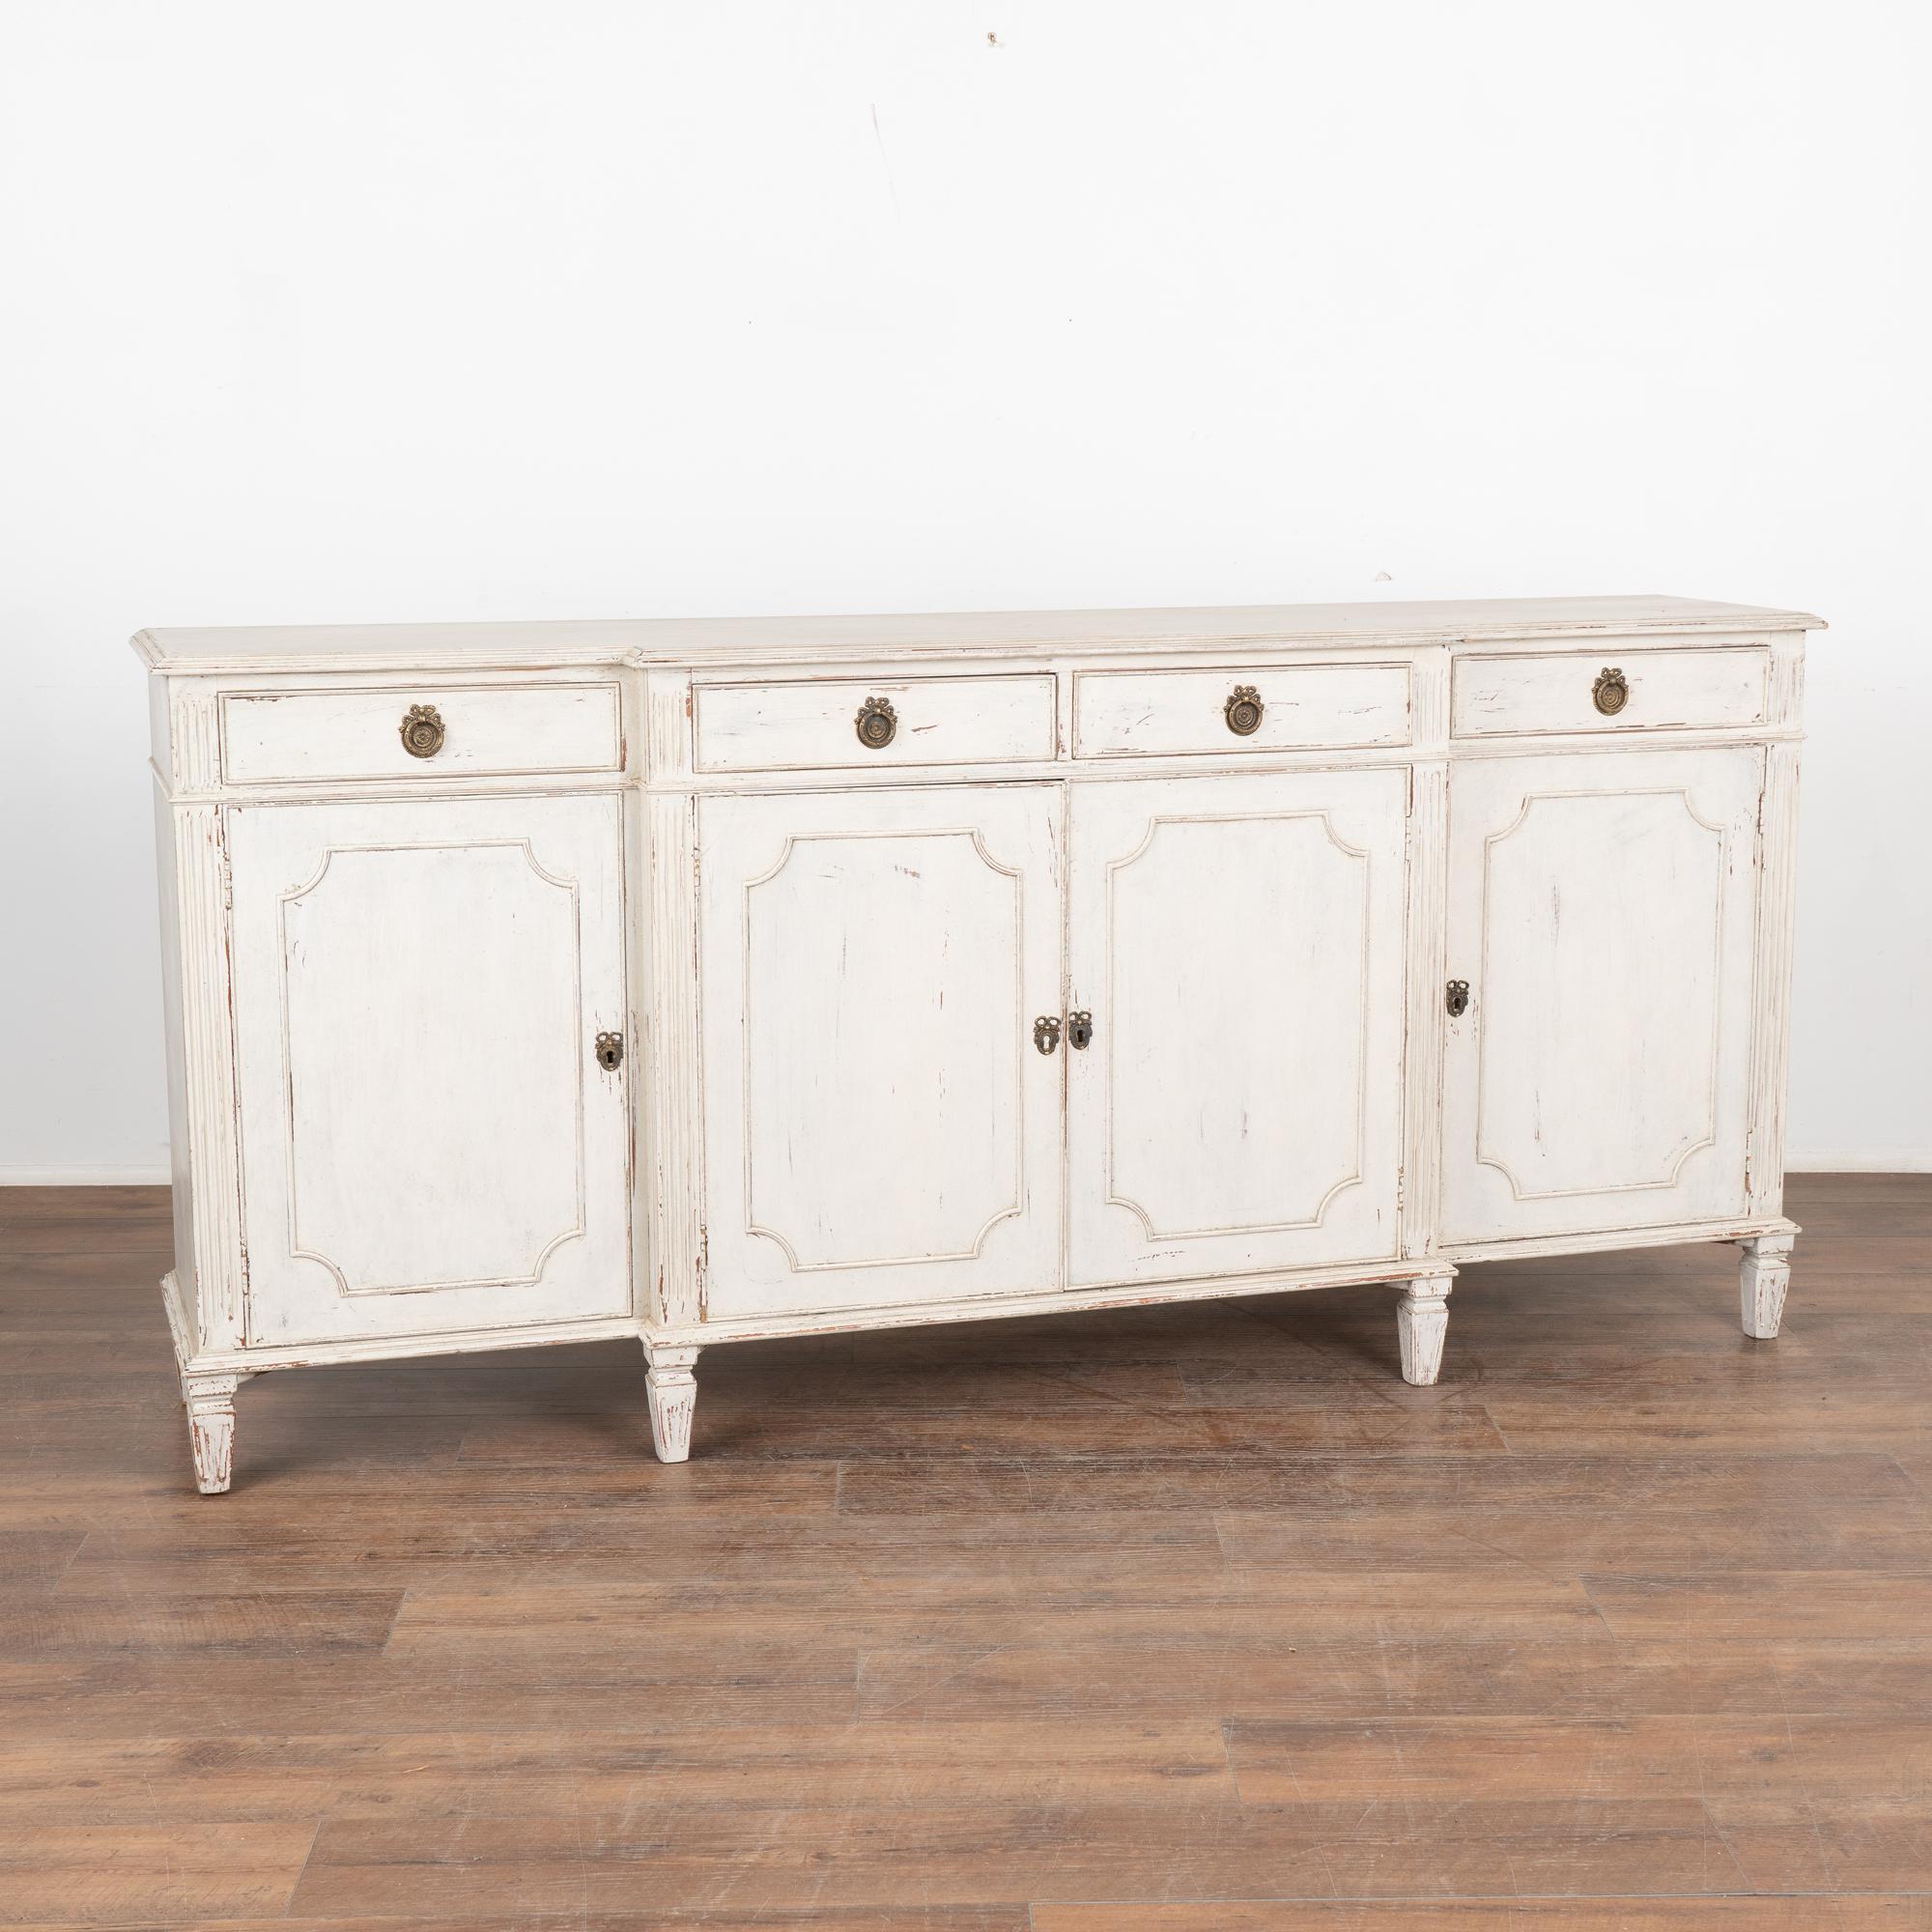 Swedish white painted sideboard/buffet with paneled doors and fluted tapered feet.
Four drawers with brass pulls over four cabinet doors, one interior shelf.
Restored, later professionally painted in layered shades of antique white and lightly